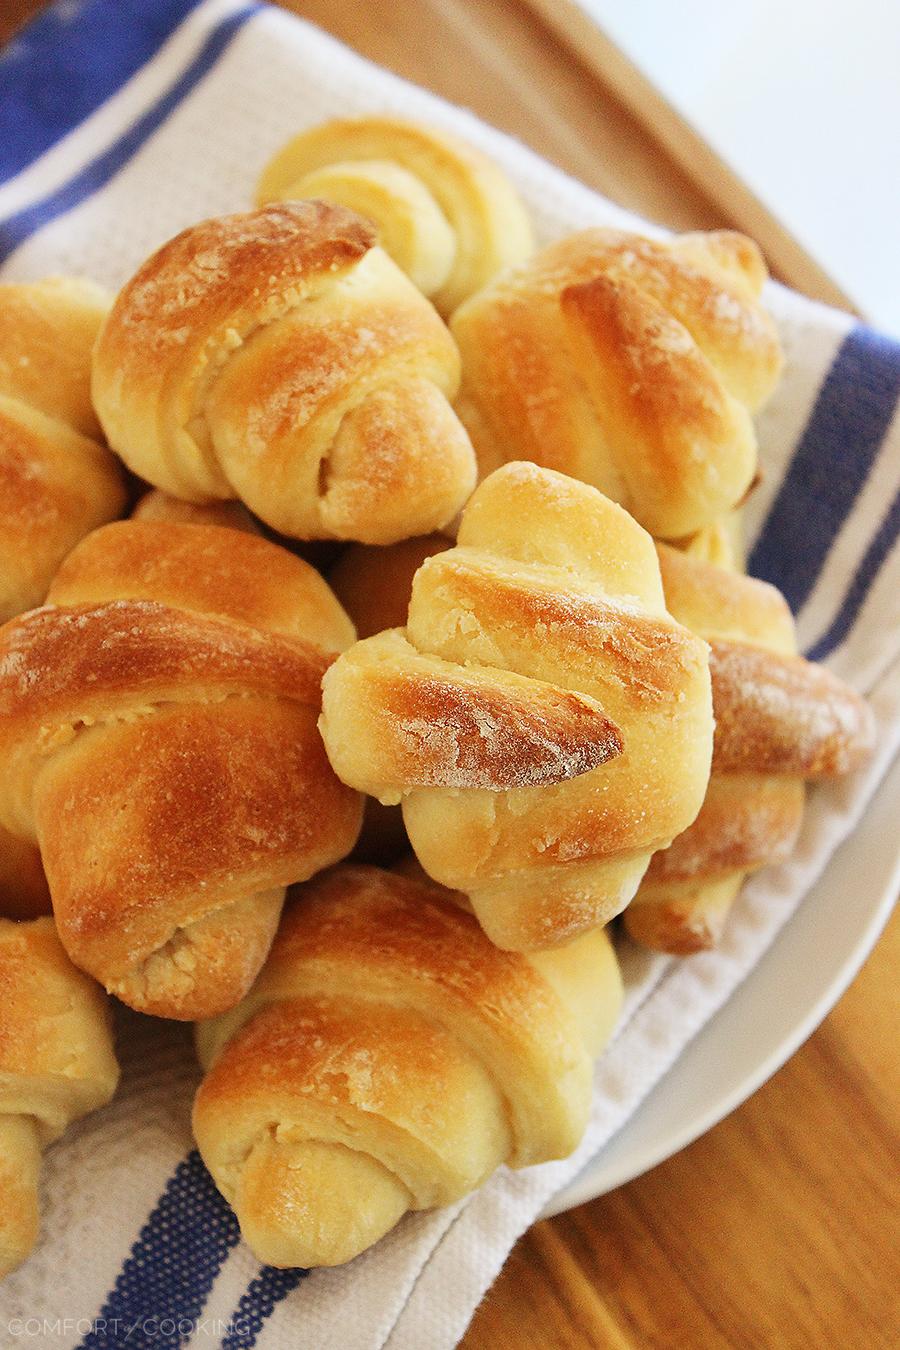 Buttery No-Knead Crescent Rolls – Super soft, easy homemade crescent rolls! Use in any recipe that calls for refrigerated crescent rolls. Full of buttery, golden brown goodness! | thecomfortofcooking.com